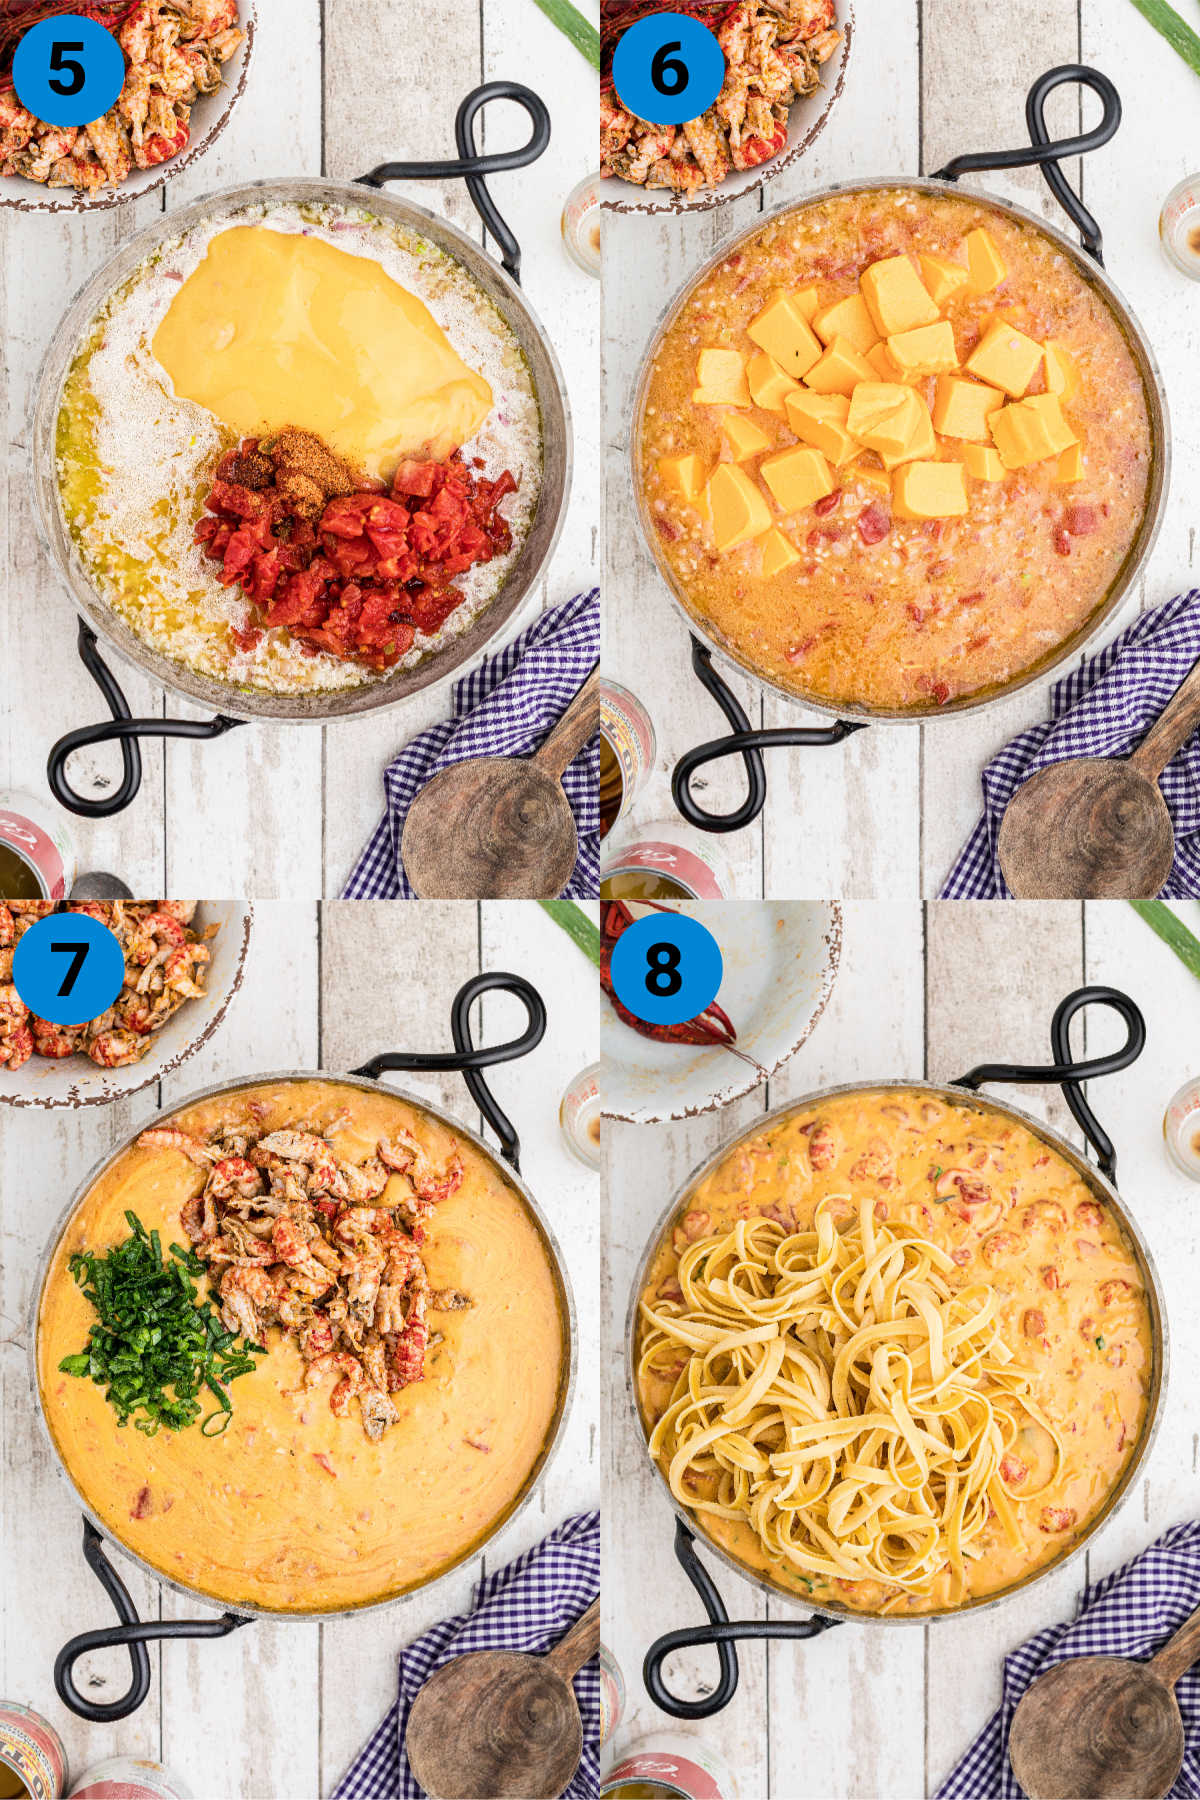 four images of a skillet each one showing different recipe steps for making crawfish fettuccine